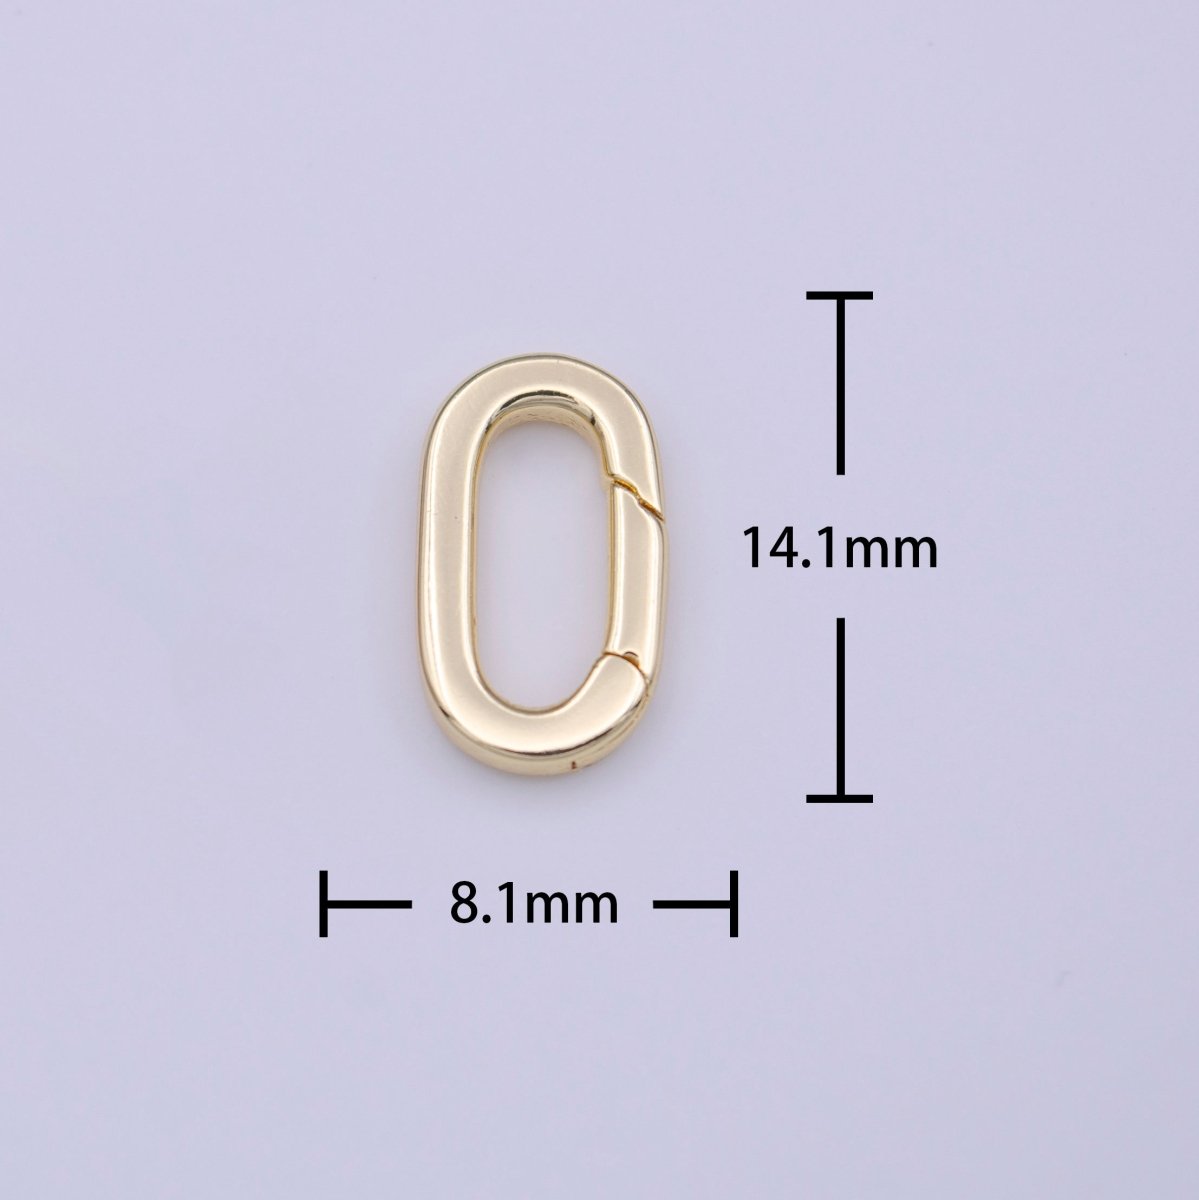 OS Minimalist 14mm Oval Oblong Push Spring Ring Gate Gold Jewelry Supply | K-235 - DLUXCA